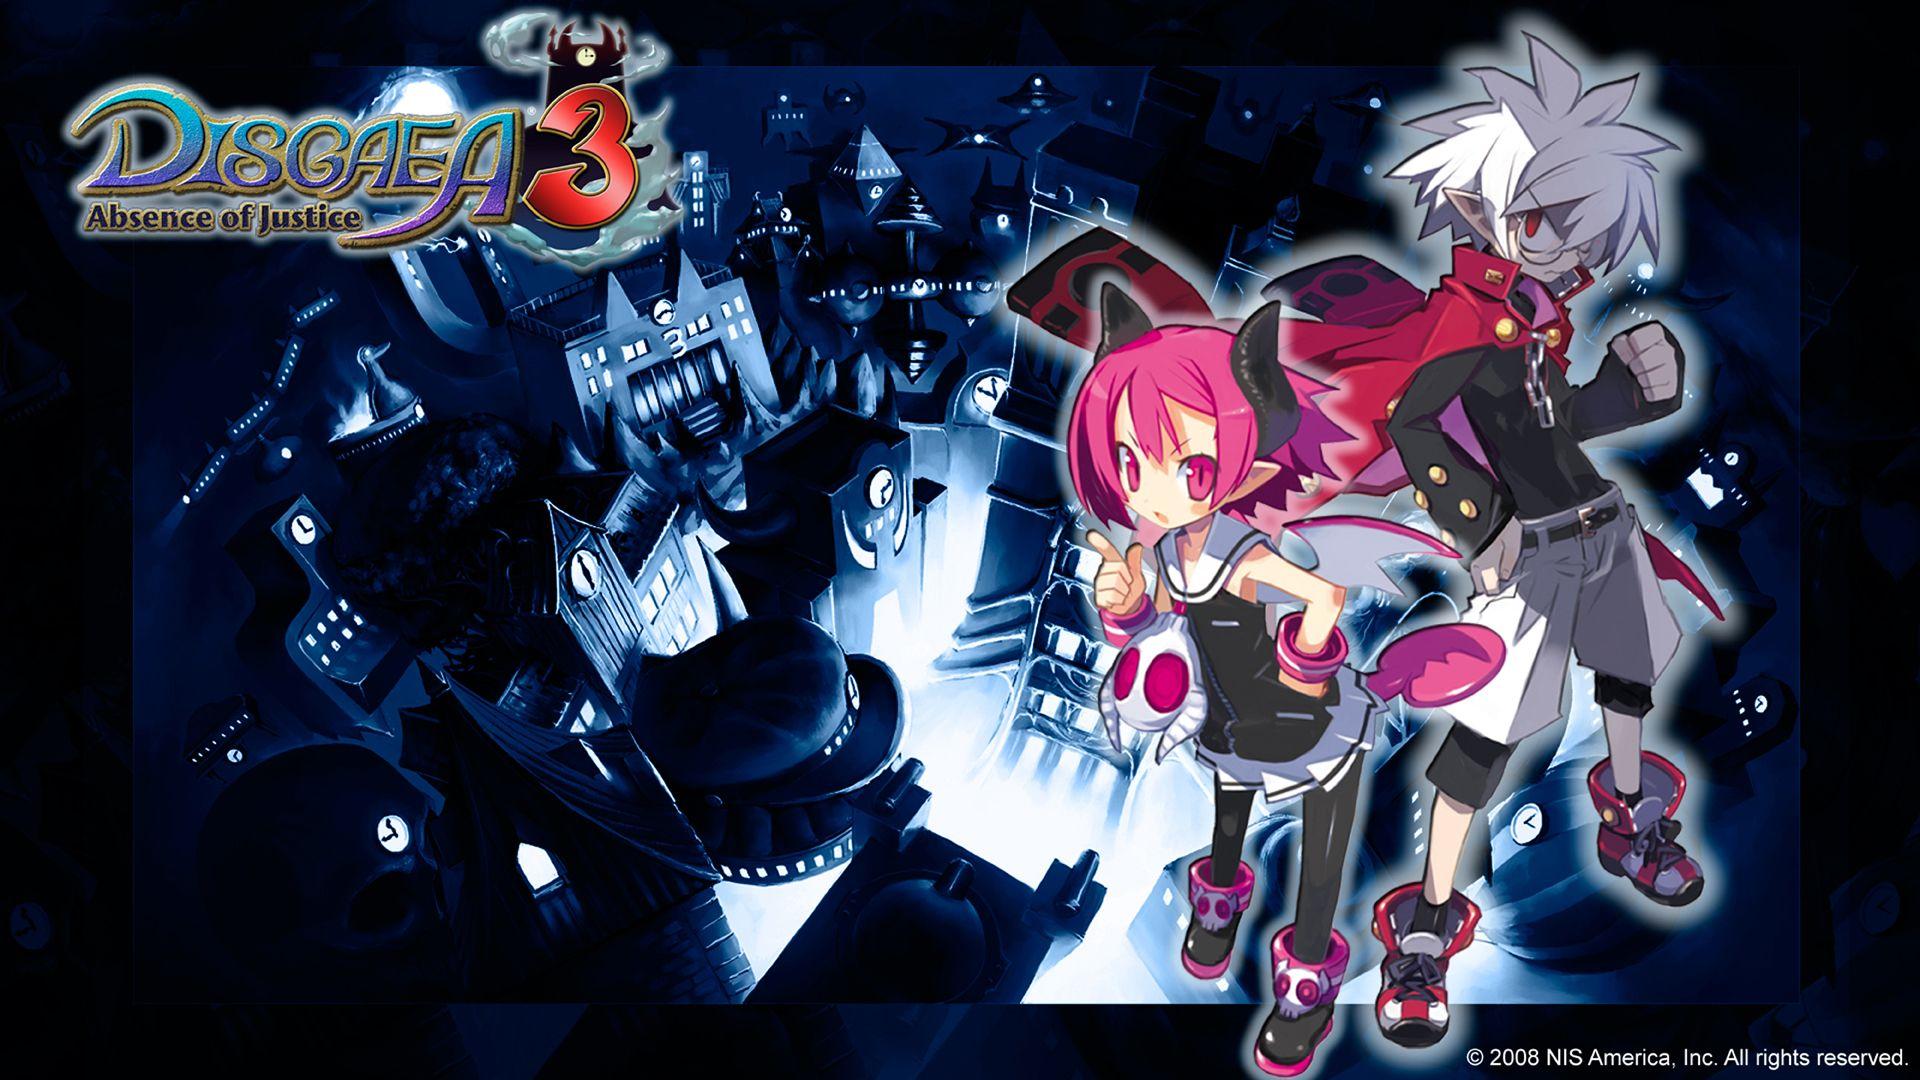 Disgaea 3, Absence of Justice HD Wallpaper. Background Image